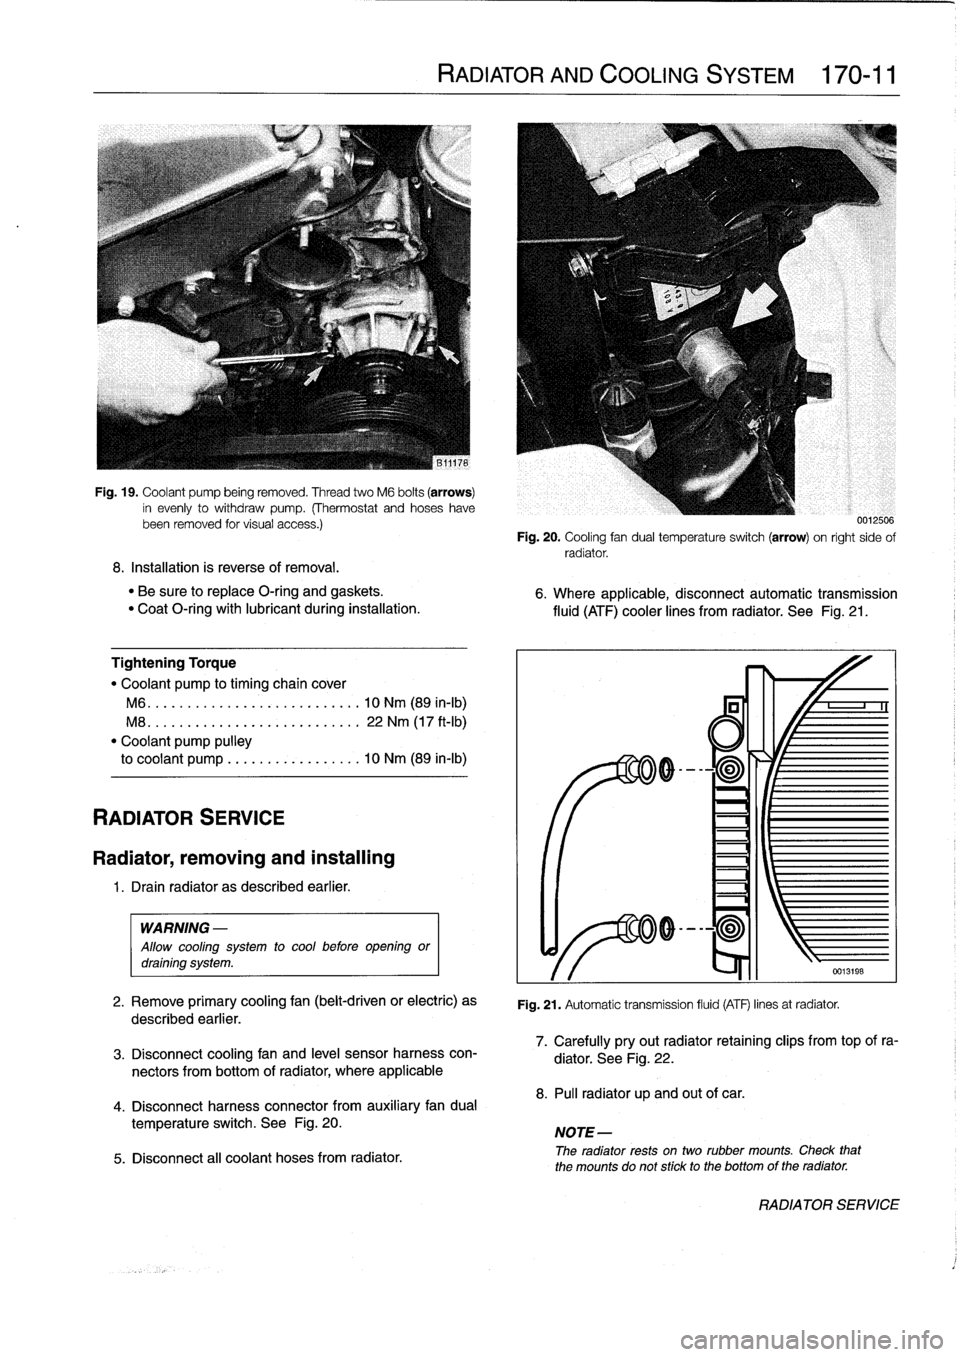 BMW 328i 1995 E36 Workshop Manual 
Fig
.
19
.
Coolant
pump
being
removed
.
Thread
two
M6
bolts
(arrows)
in
evenly
to
withdraw
pump
.
(Thermostat
and
hoseshavebeen
removed
tor
visual
access
.)

8
.
Installation
is
reverse
of
removal
.
